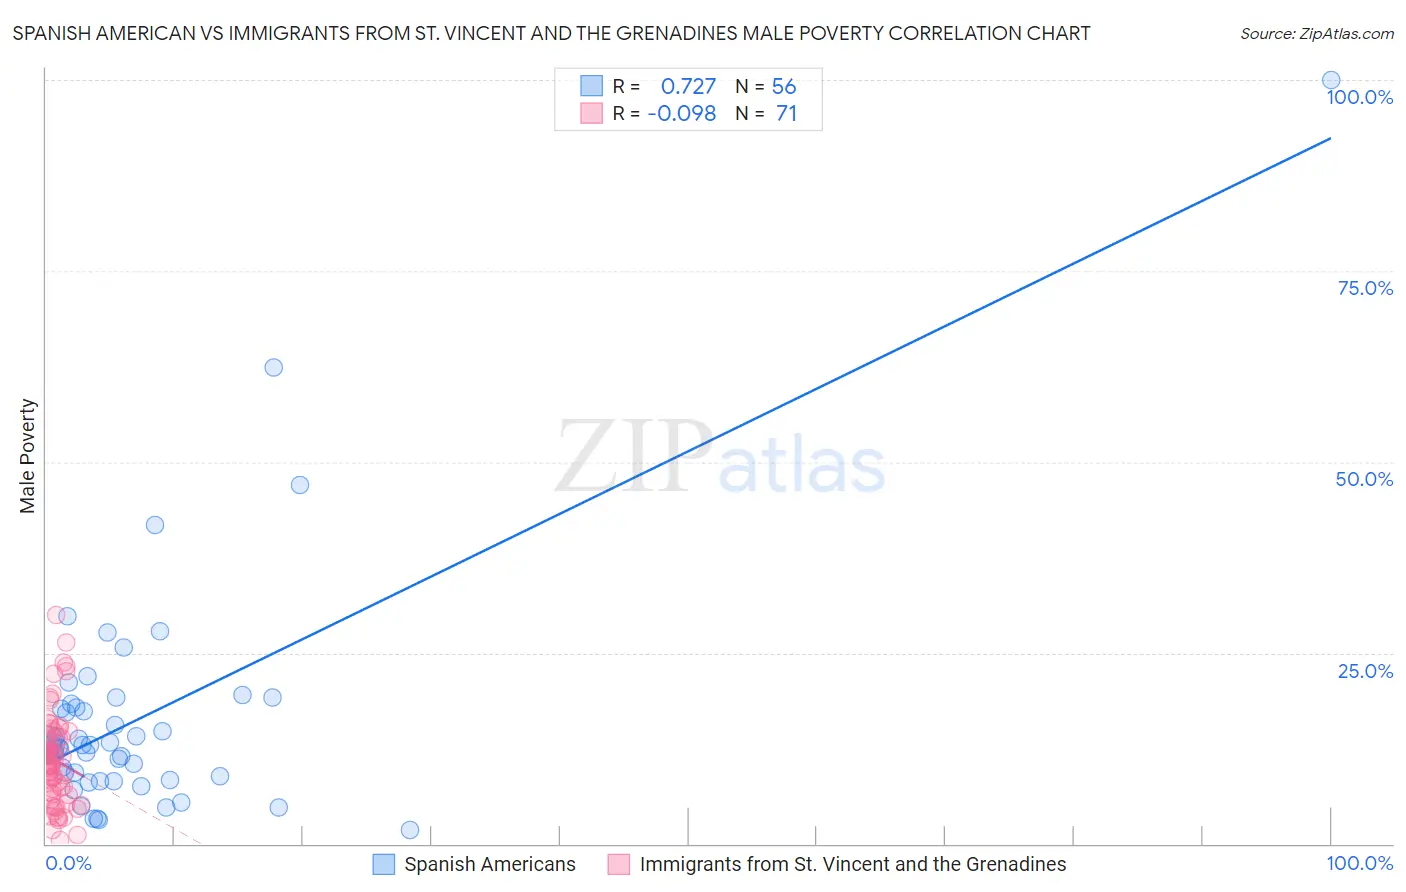 Spanish American vs Immigrants from St. Vincent and the Grenadines Male Poverty